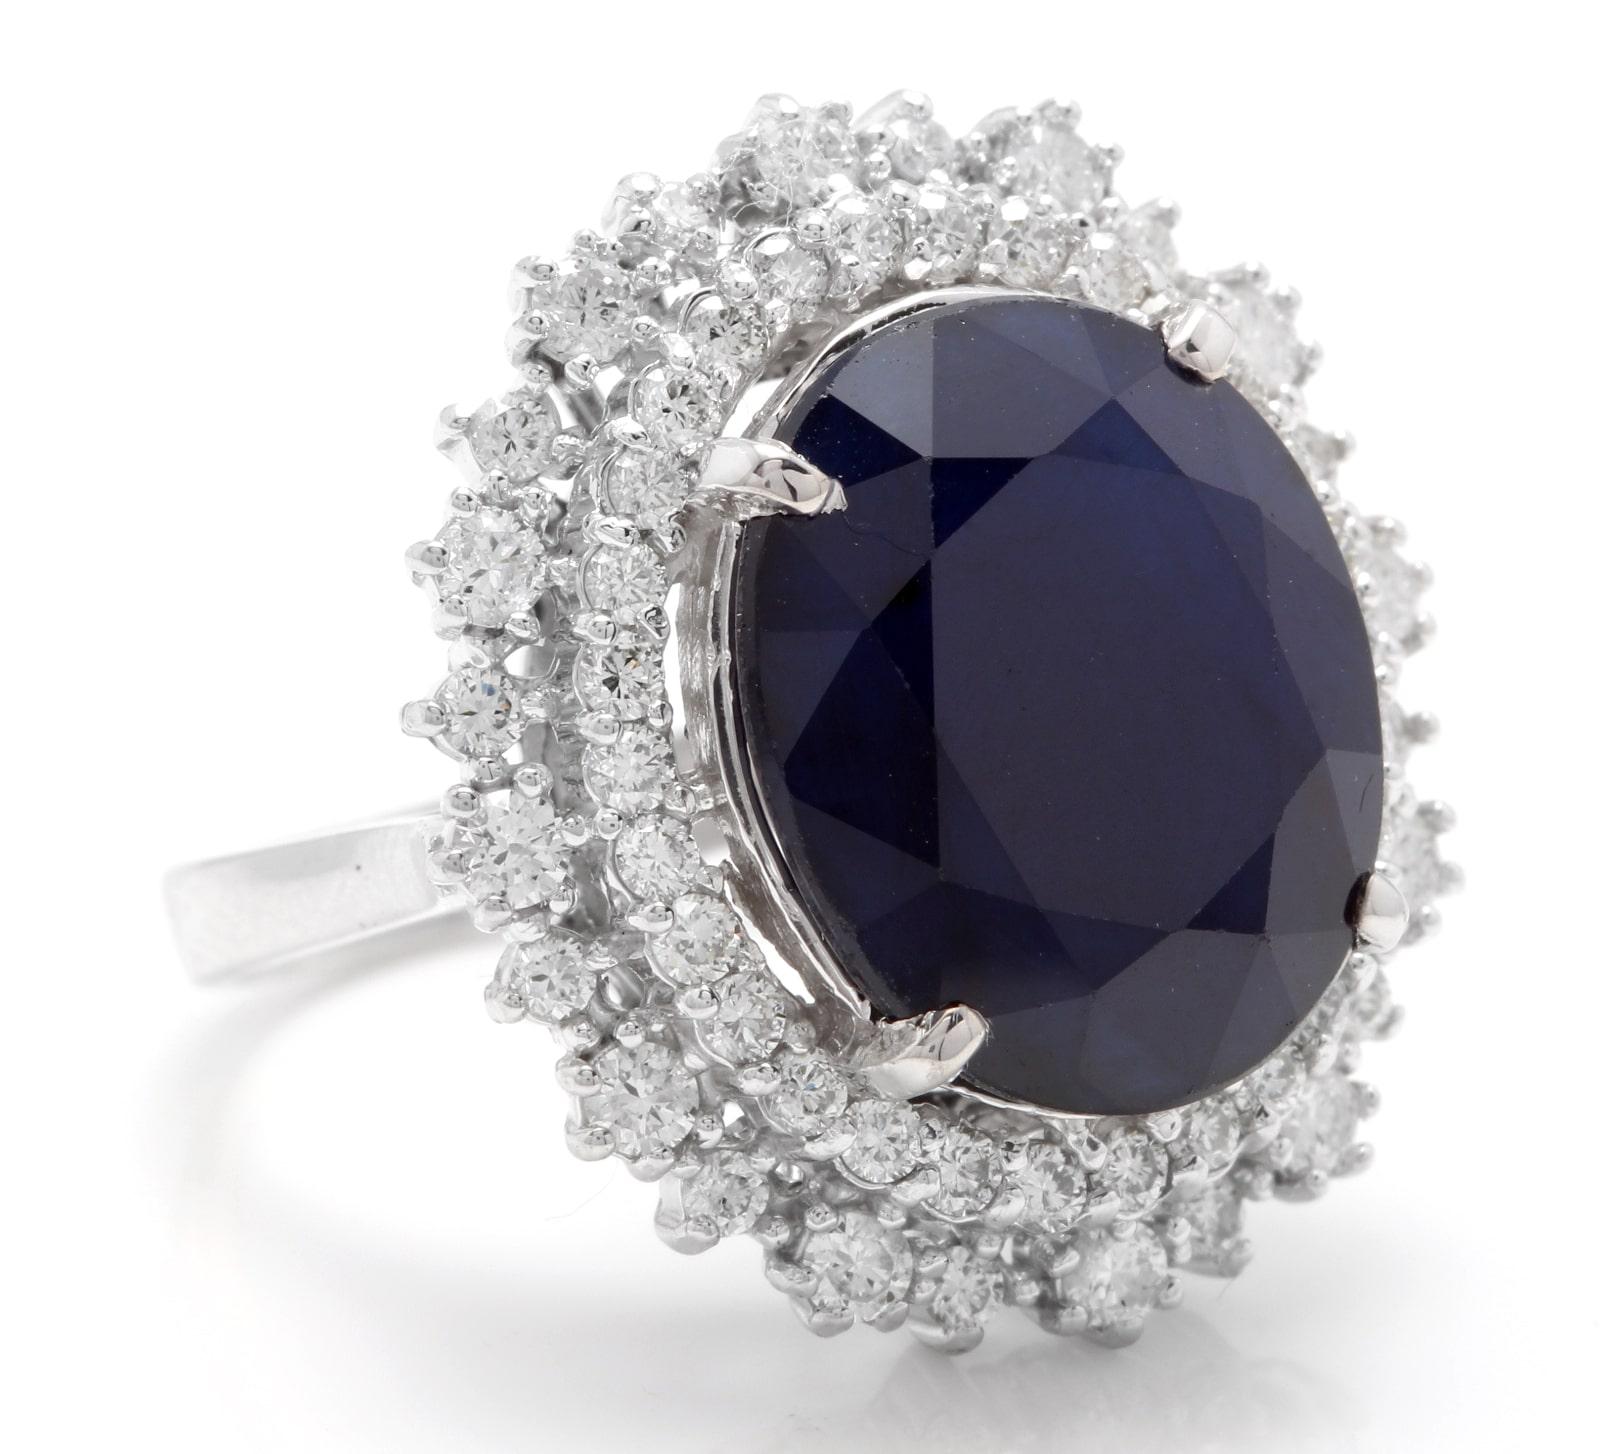 13.50 Carats Exquisite Natural Blue Sapphire and Diamond 14K Solid White Gold Ring

Total Natural Blue Sapphire Weights: Approx. 12.00 Carats

Sapphire Measures: 16 x 13.00mm

Sapphire Treatment: Diffusion

Natural Round Diamonds Weight: 1.50 Carats